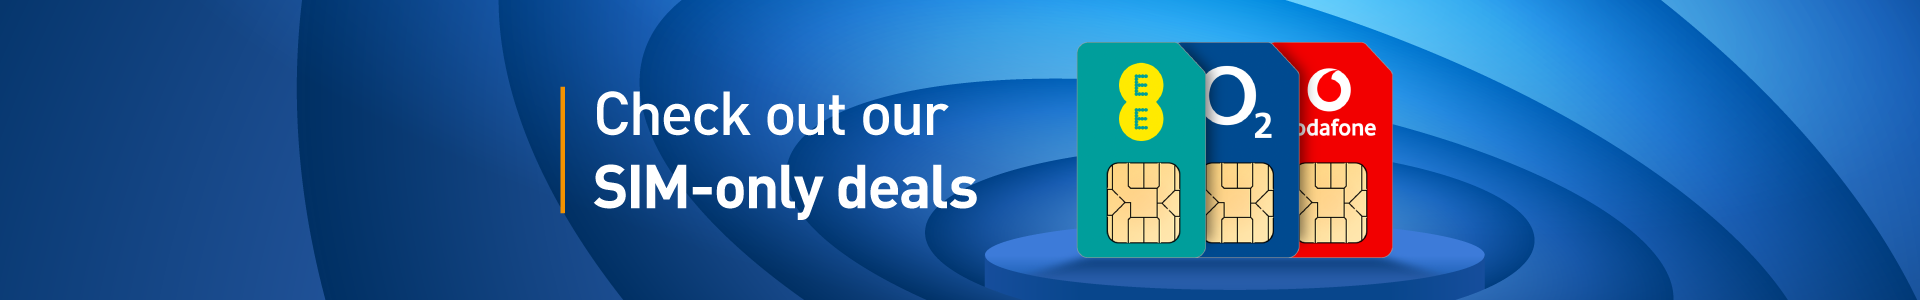 Check out our SIM-only deals